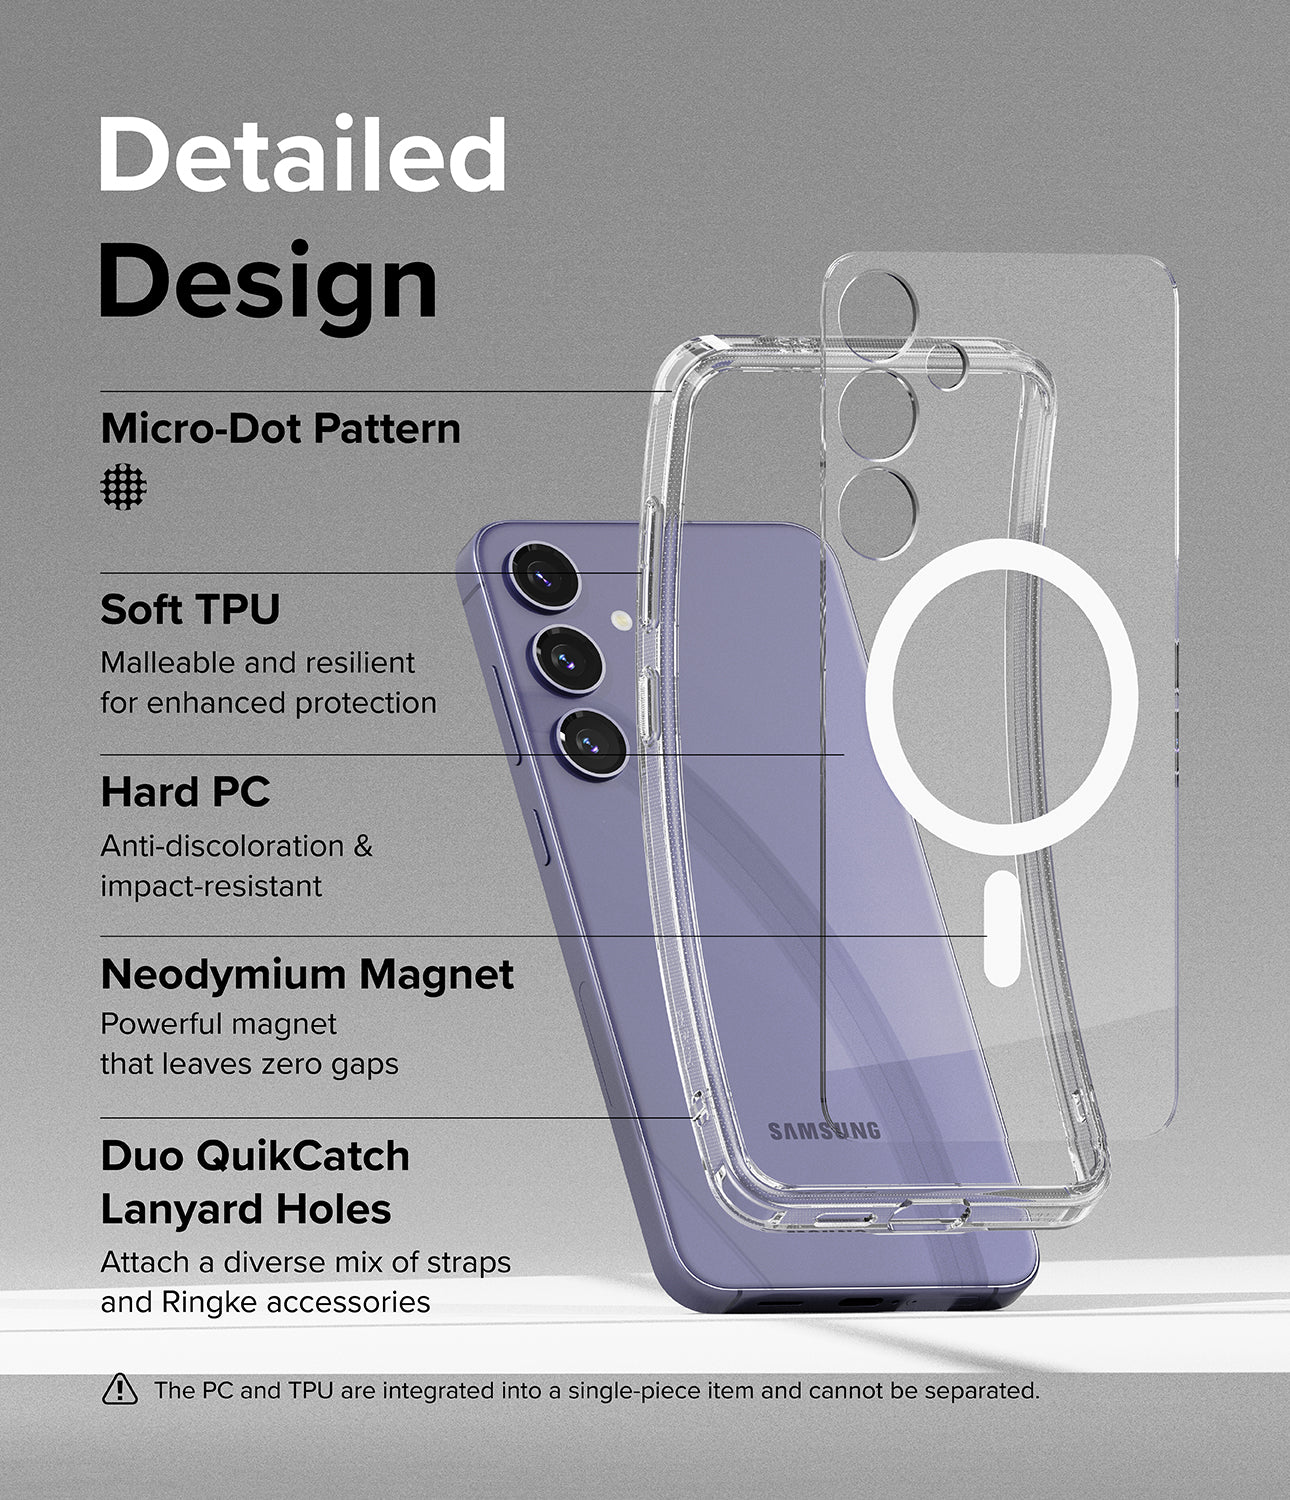 Galaxy S24 Plus Case | Fusion Magnetic - Detailed Design. Micro-Dot Pattern. Malleable and resilient for enhanced protection with Soft TPU. Anti-discoloration and impact-resistant with Hard PC. Powerful neodymium magnet that leaves zero gaps. Duo QuikCatch Lanyard Holes to attach a diverse mix of straps and Ringke accessories.